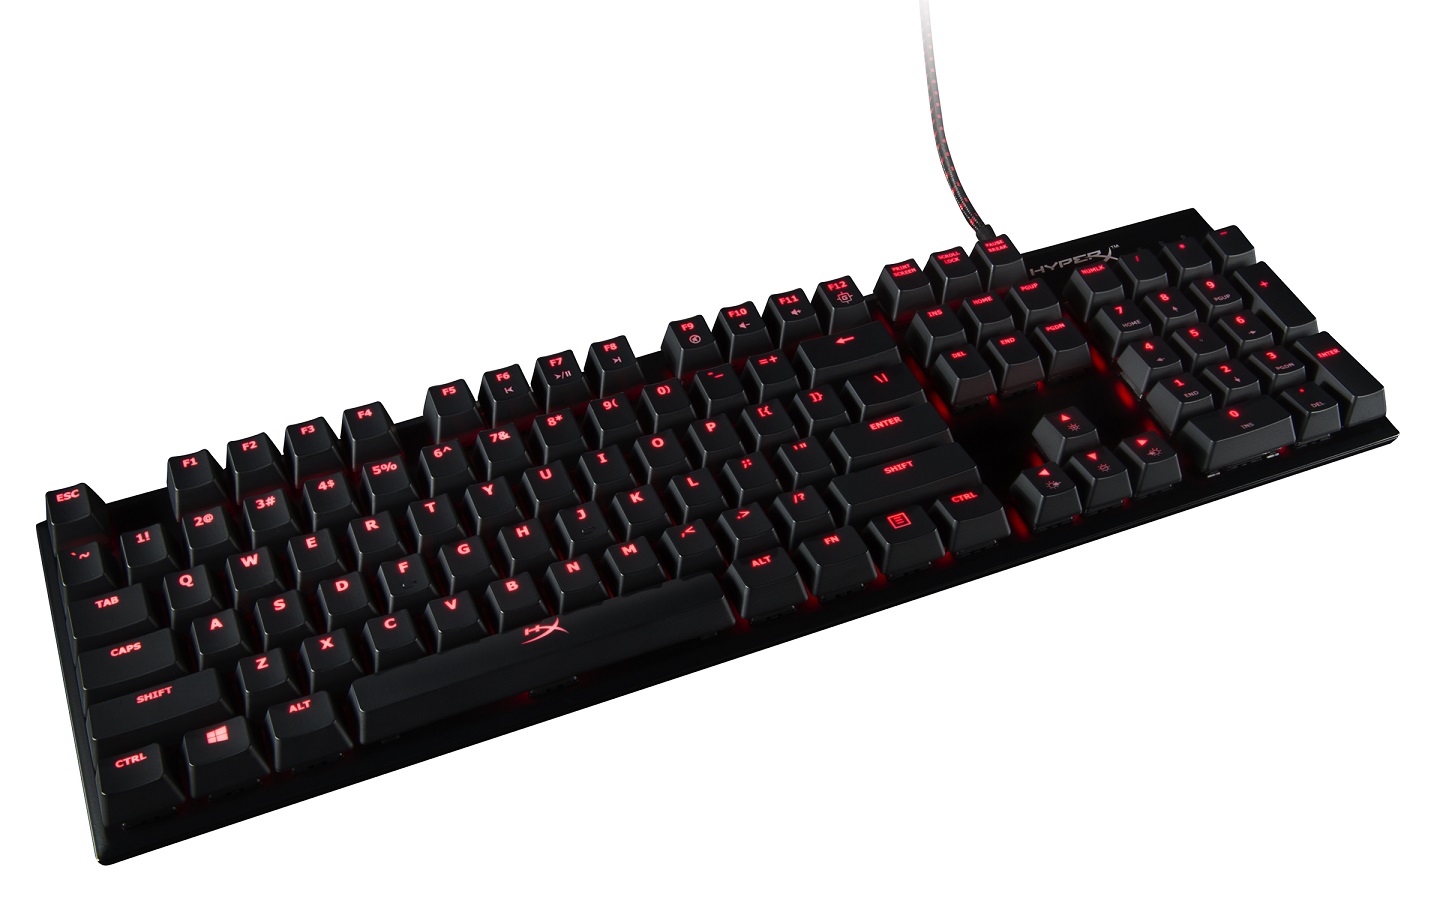 HyperX Launches ALLOY FPS Mechanical Gaming Keyboard for $99.99